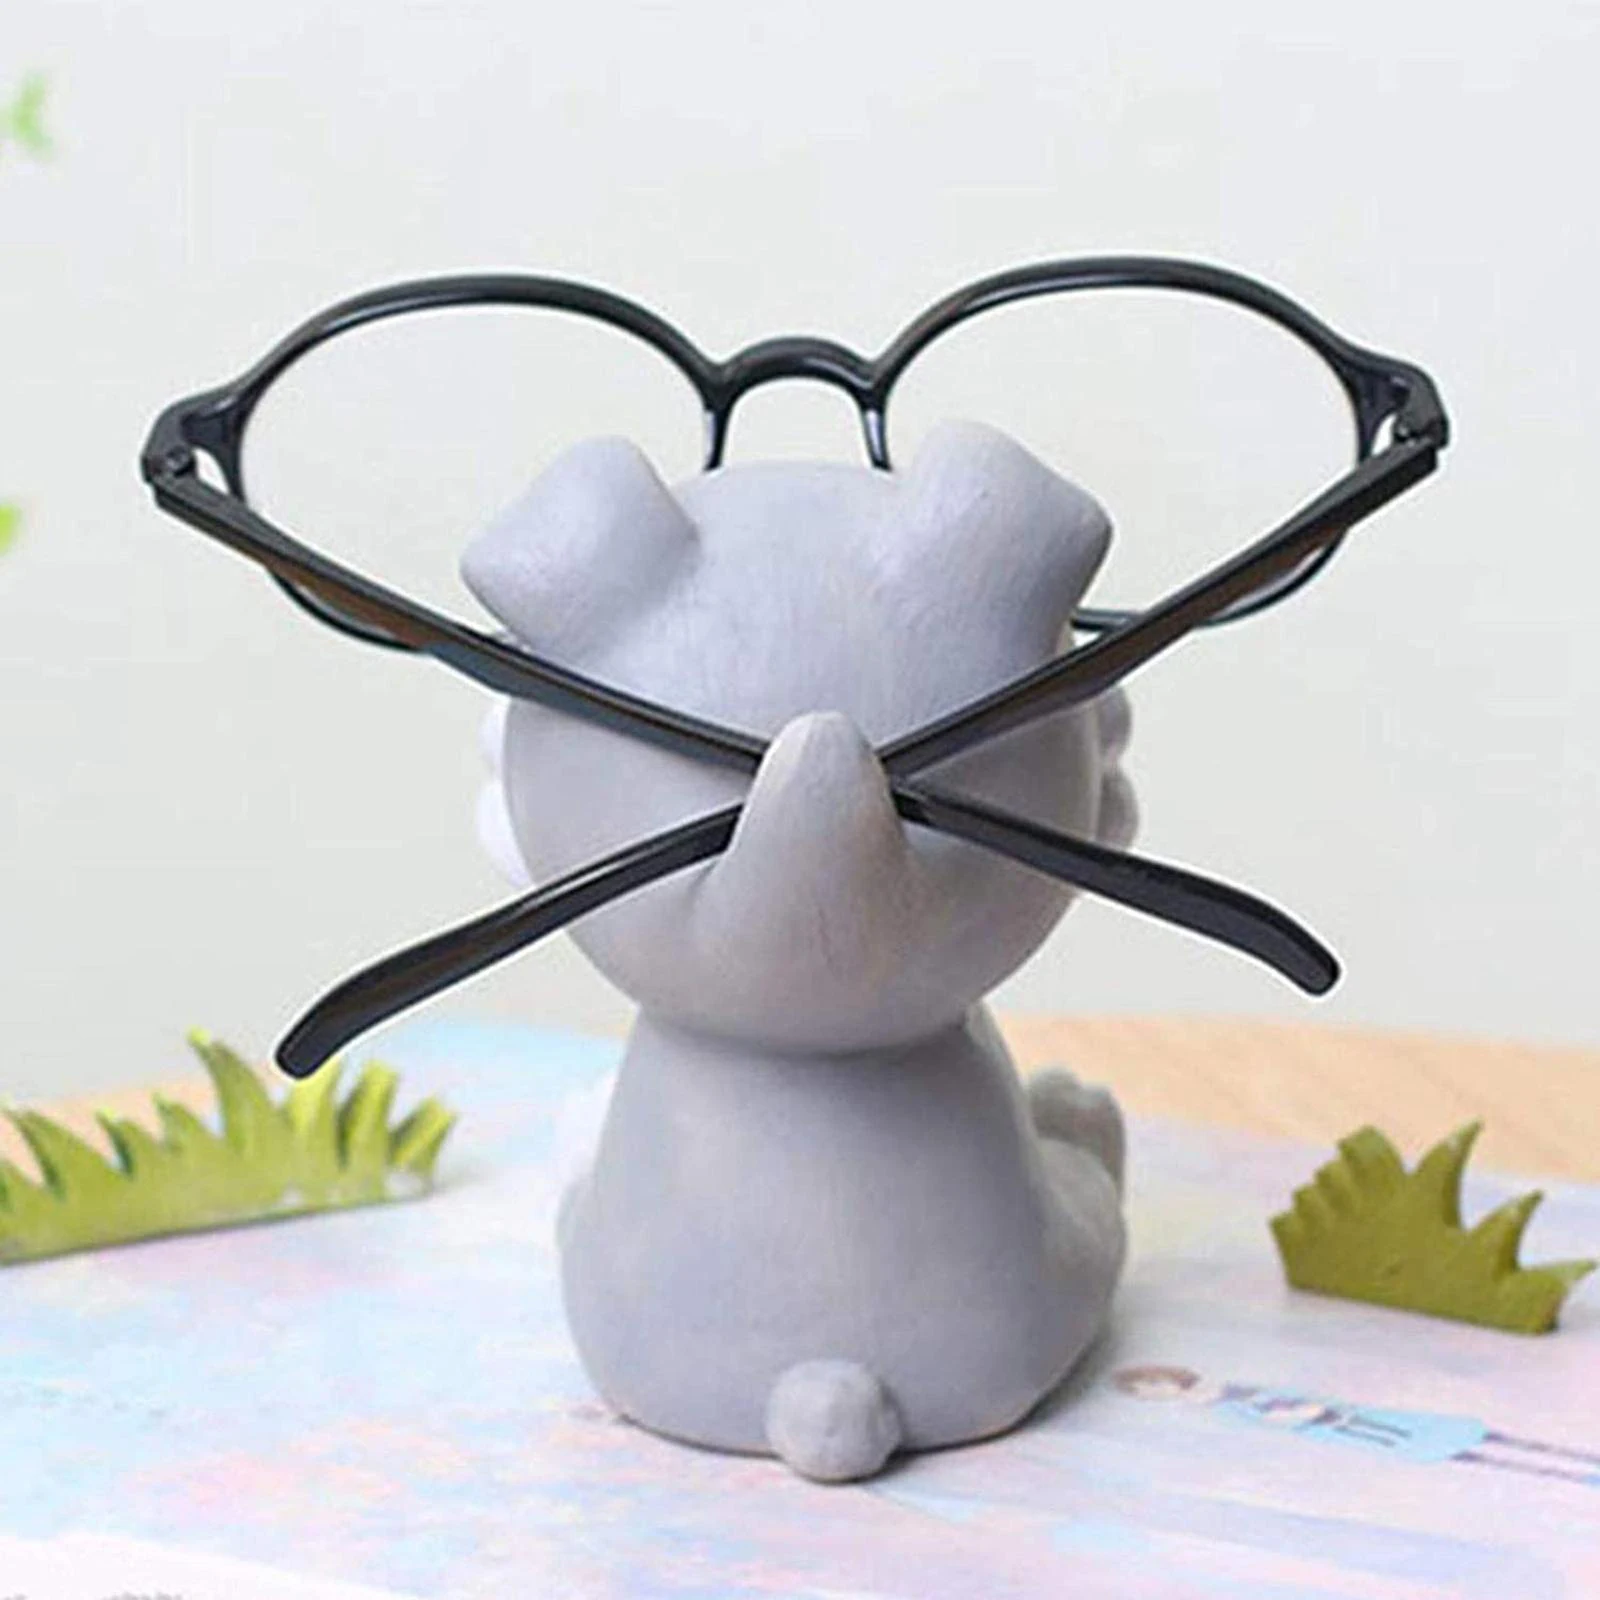 Novelty Dog Reading Glasses Holder Spectacle Eyeglasses Display Stand Gifts 3D Cute  Animal Sunglass Display Rack Shelf